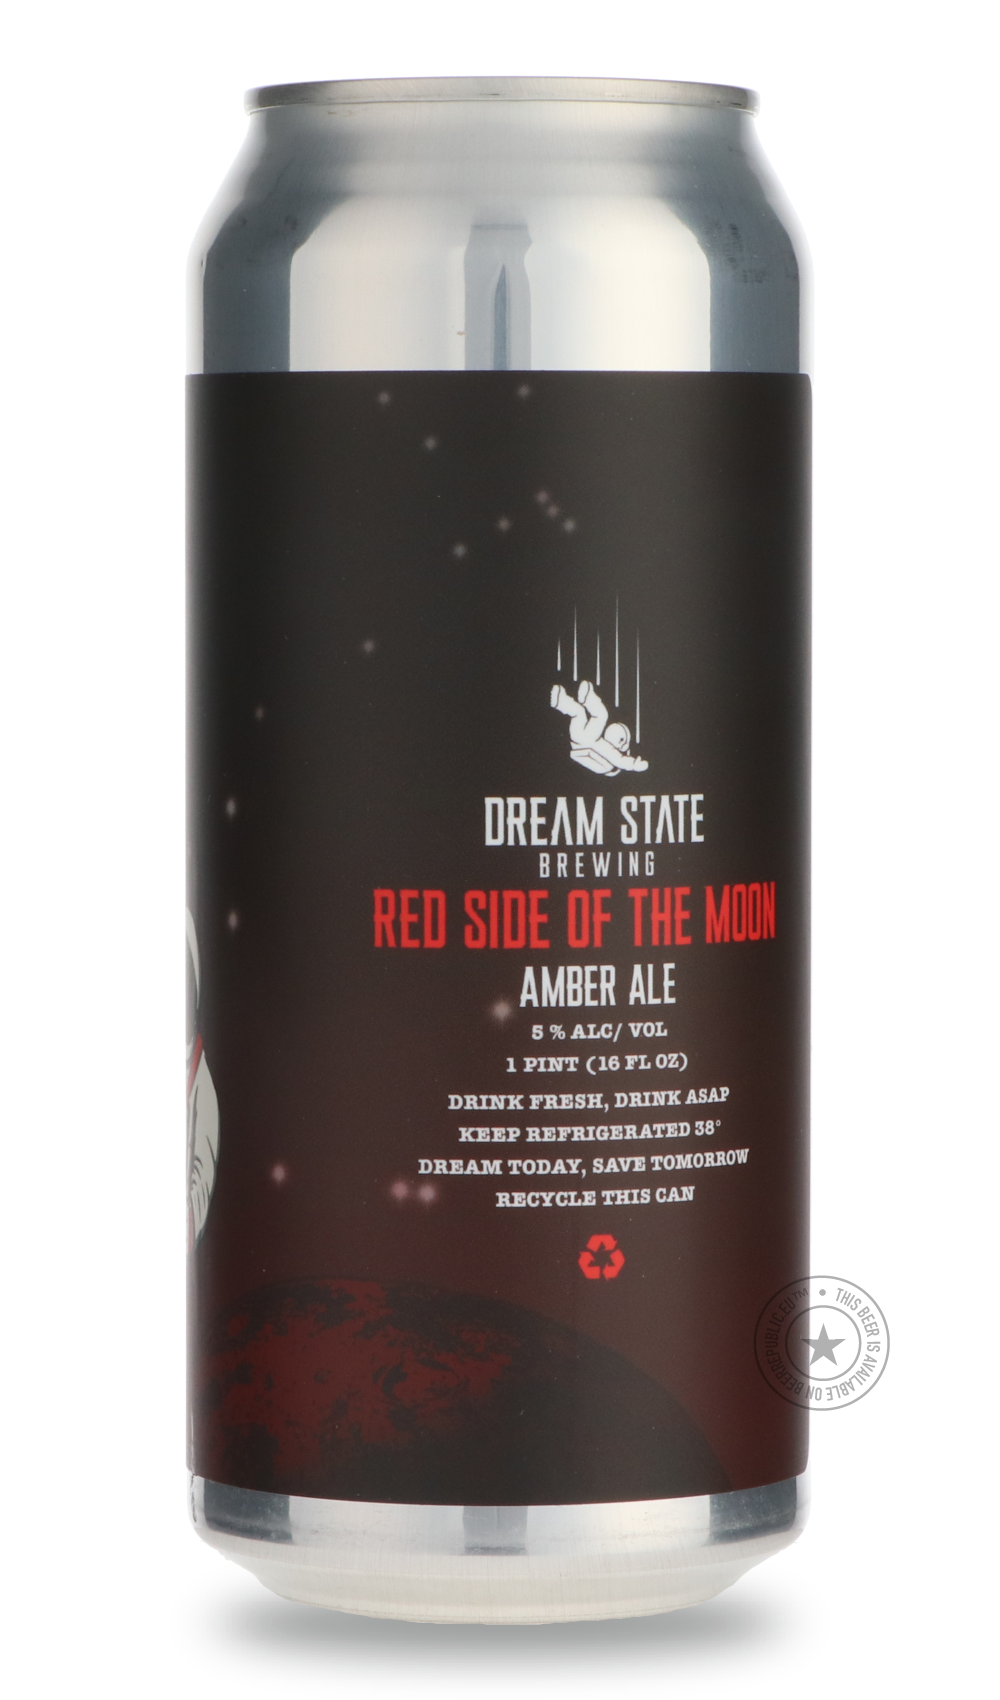 -Dream State- Red Side of the Moon-Pale- Only @ Beer Republic - The best online beer store for American & Canadian craft beer - Buy beer online from the USA and Canada - Bier online kopen - Amerikaans bier kopen - Craft beer store - Craft beer kopen - Amerikanisch bier kaufen - Bier online kaufen - Acheter biere online - IPA - Stout - Porter - New England IPA - Hazy IPA - Imperial Stout - Barrel Aged - Barrel Aged Imperial Stout - Brown - Dark beer - Blond - Blonde - Pilsner - Lager - Wheat - Weizen - Amber